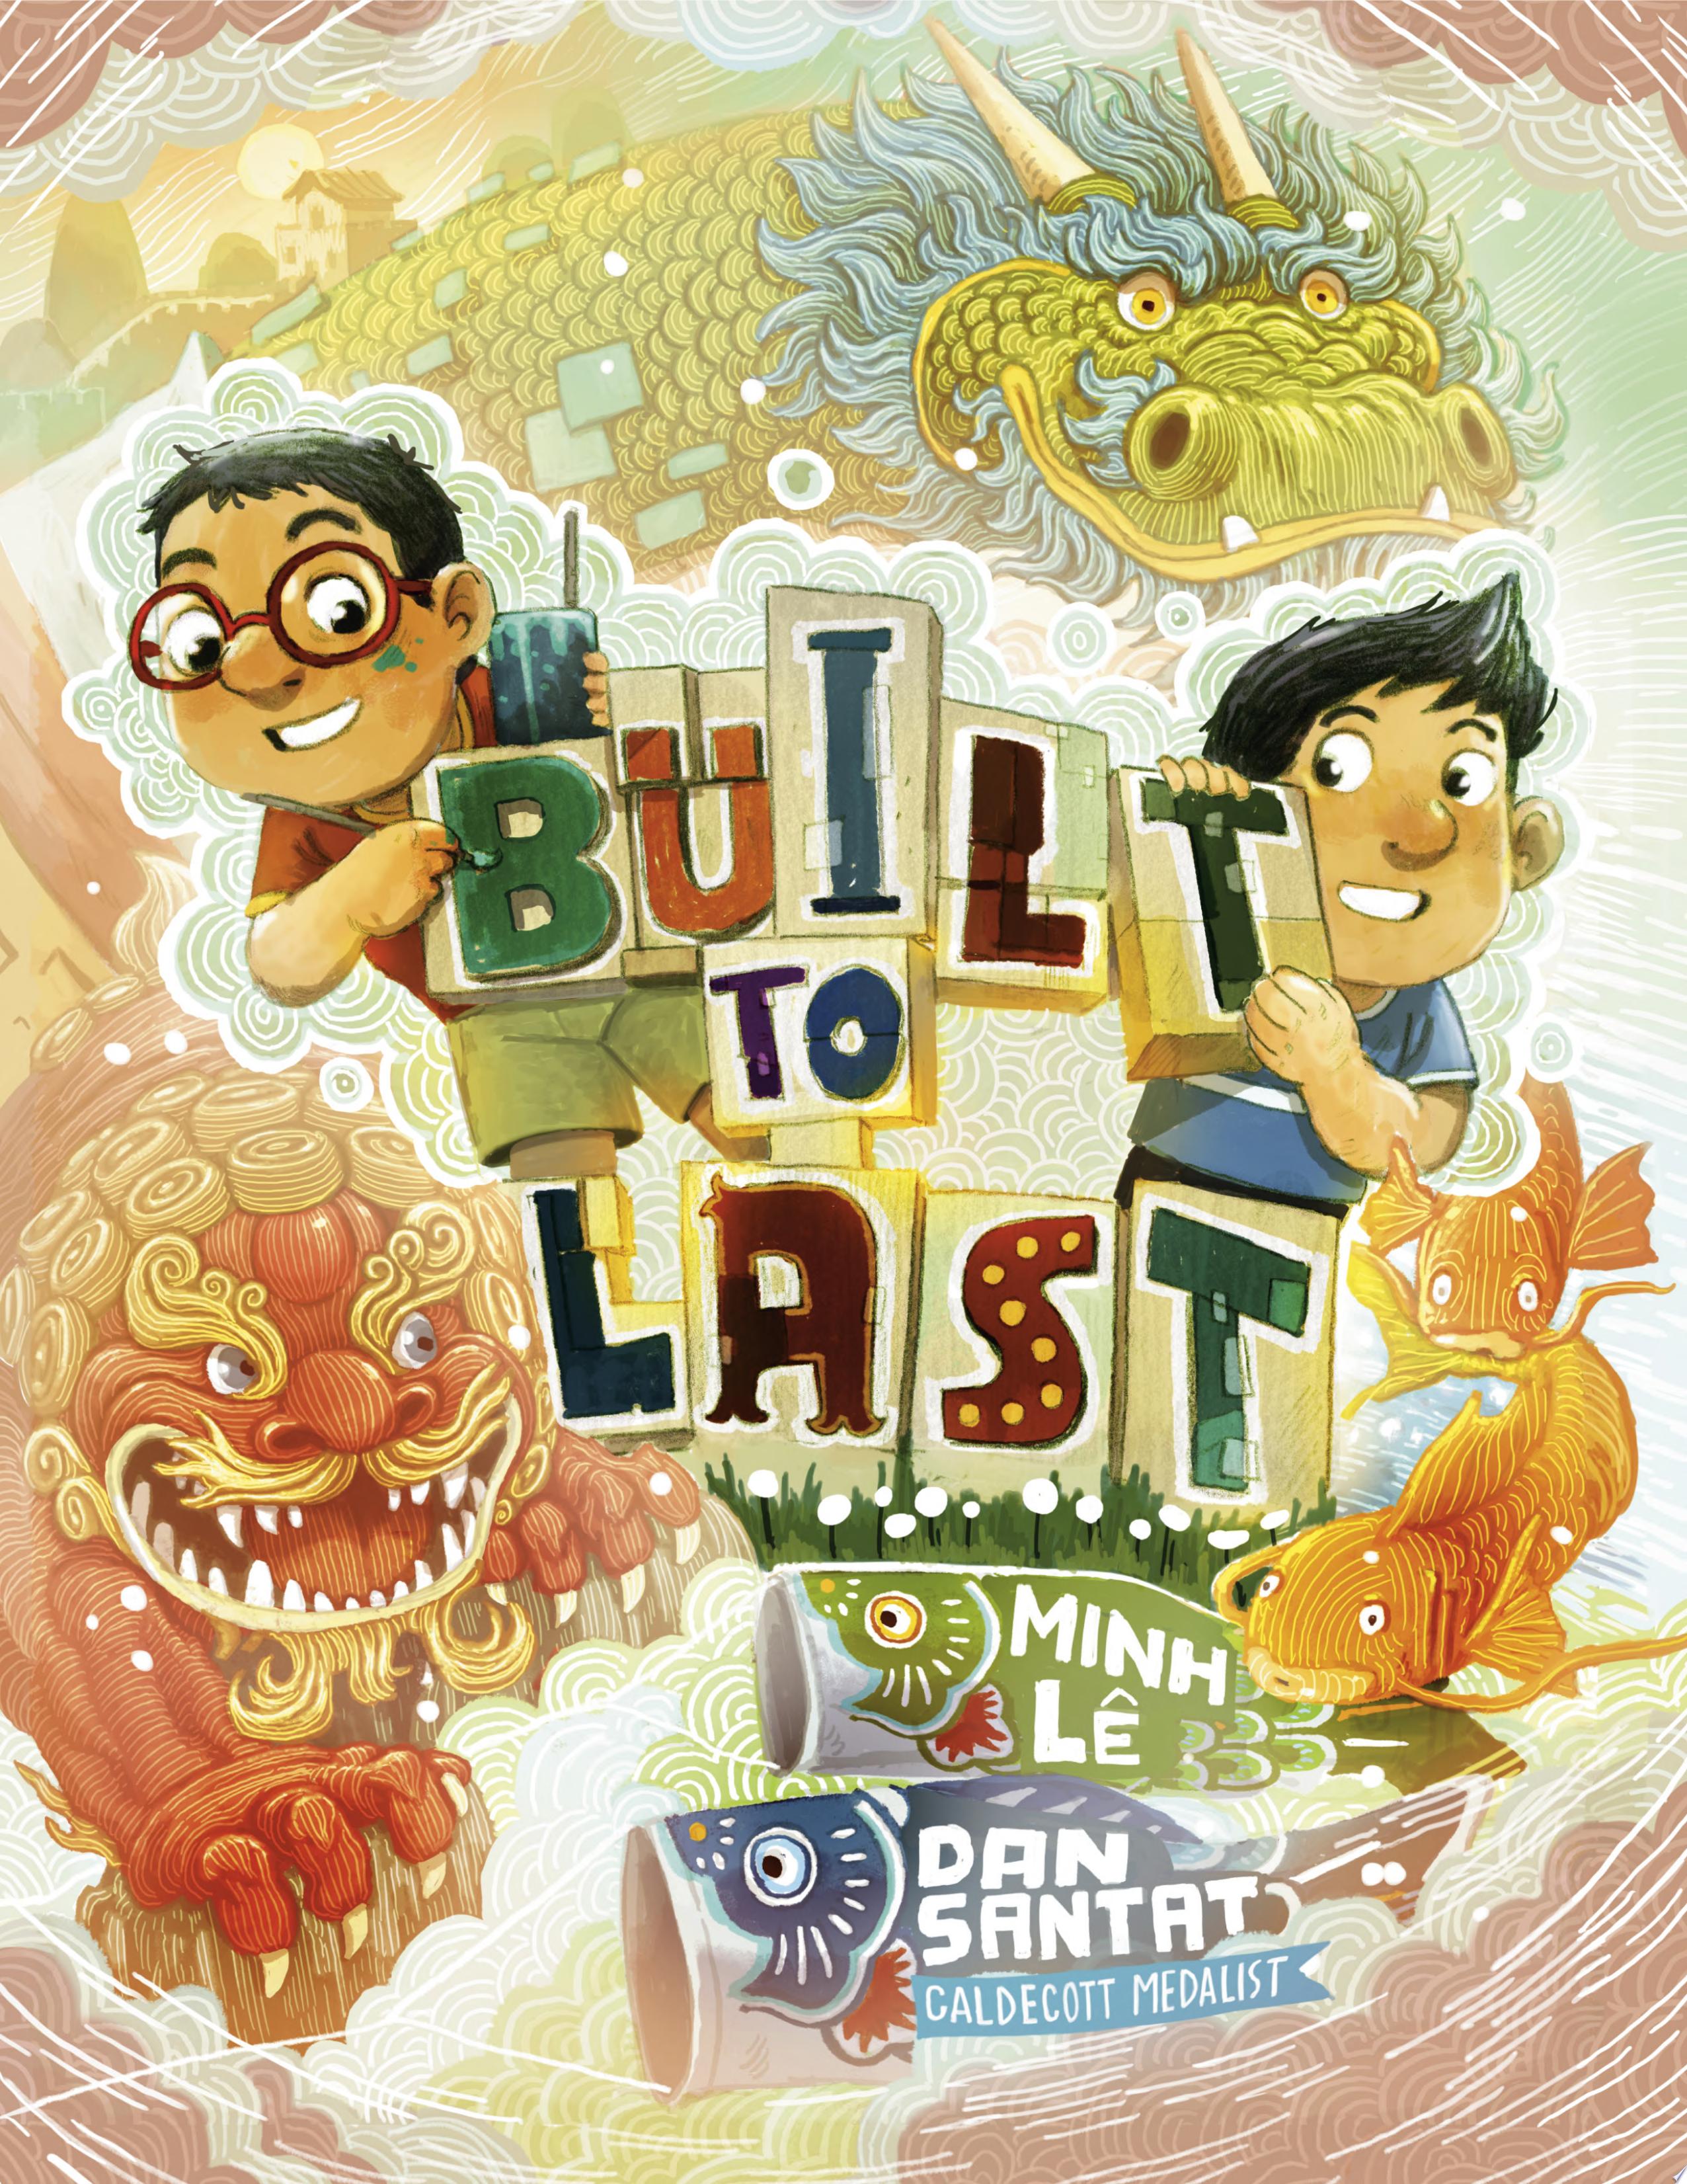 Image for "Built to Last"